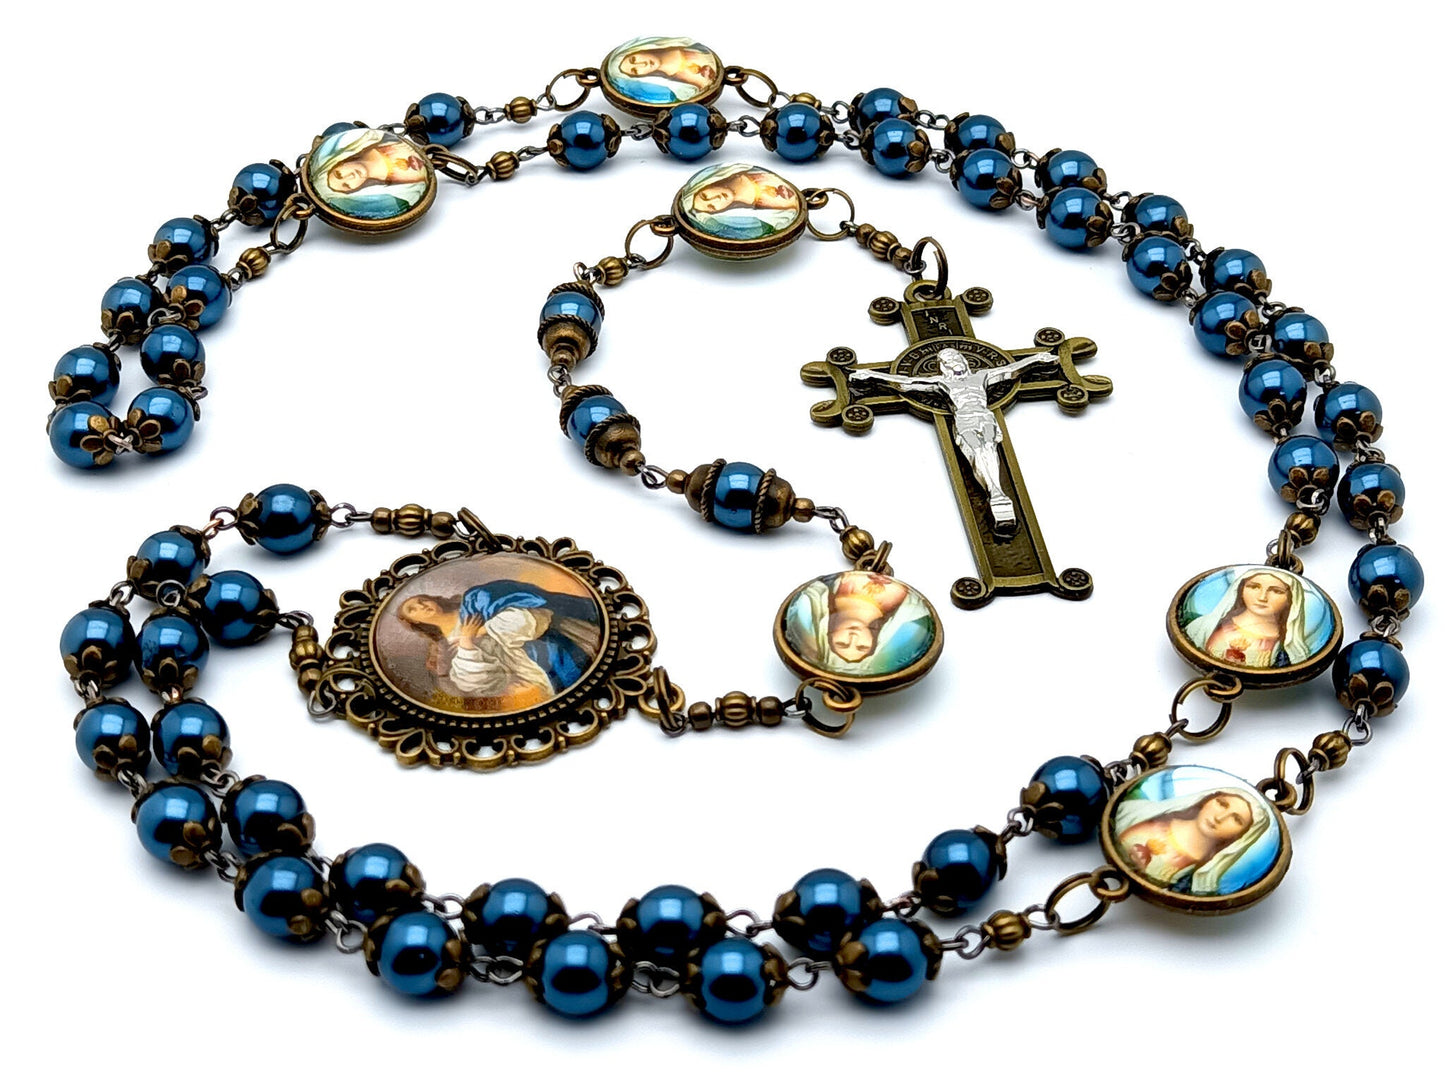 The Annunciation of Mary unique rosary beads pearlised glass vintage style rosary beads with brass and silver Saint Benedict crucifix.